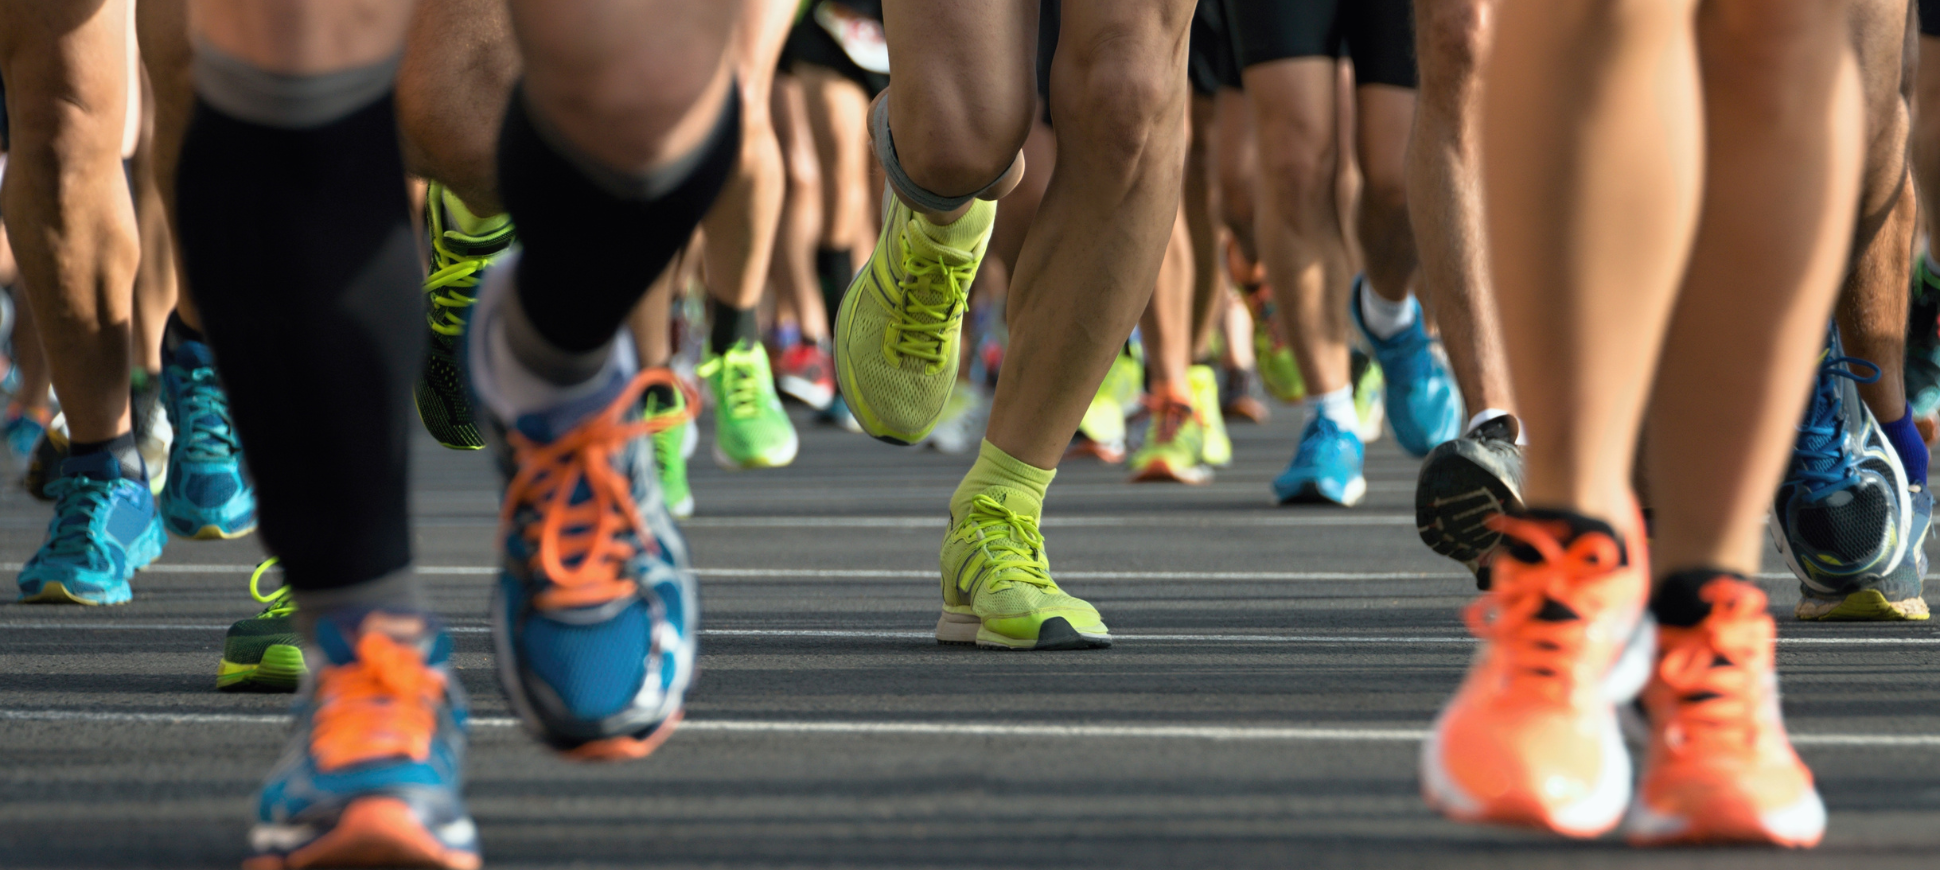 Image of people's legs in the middle of a marathon